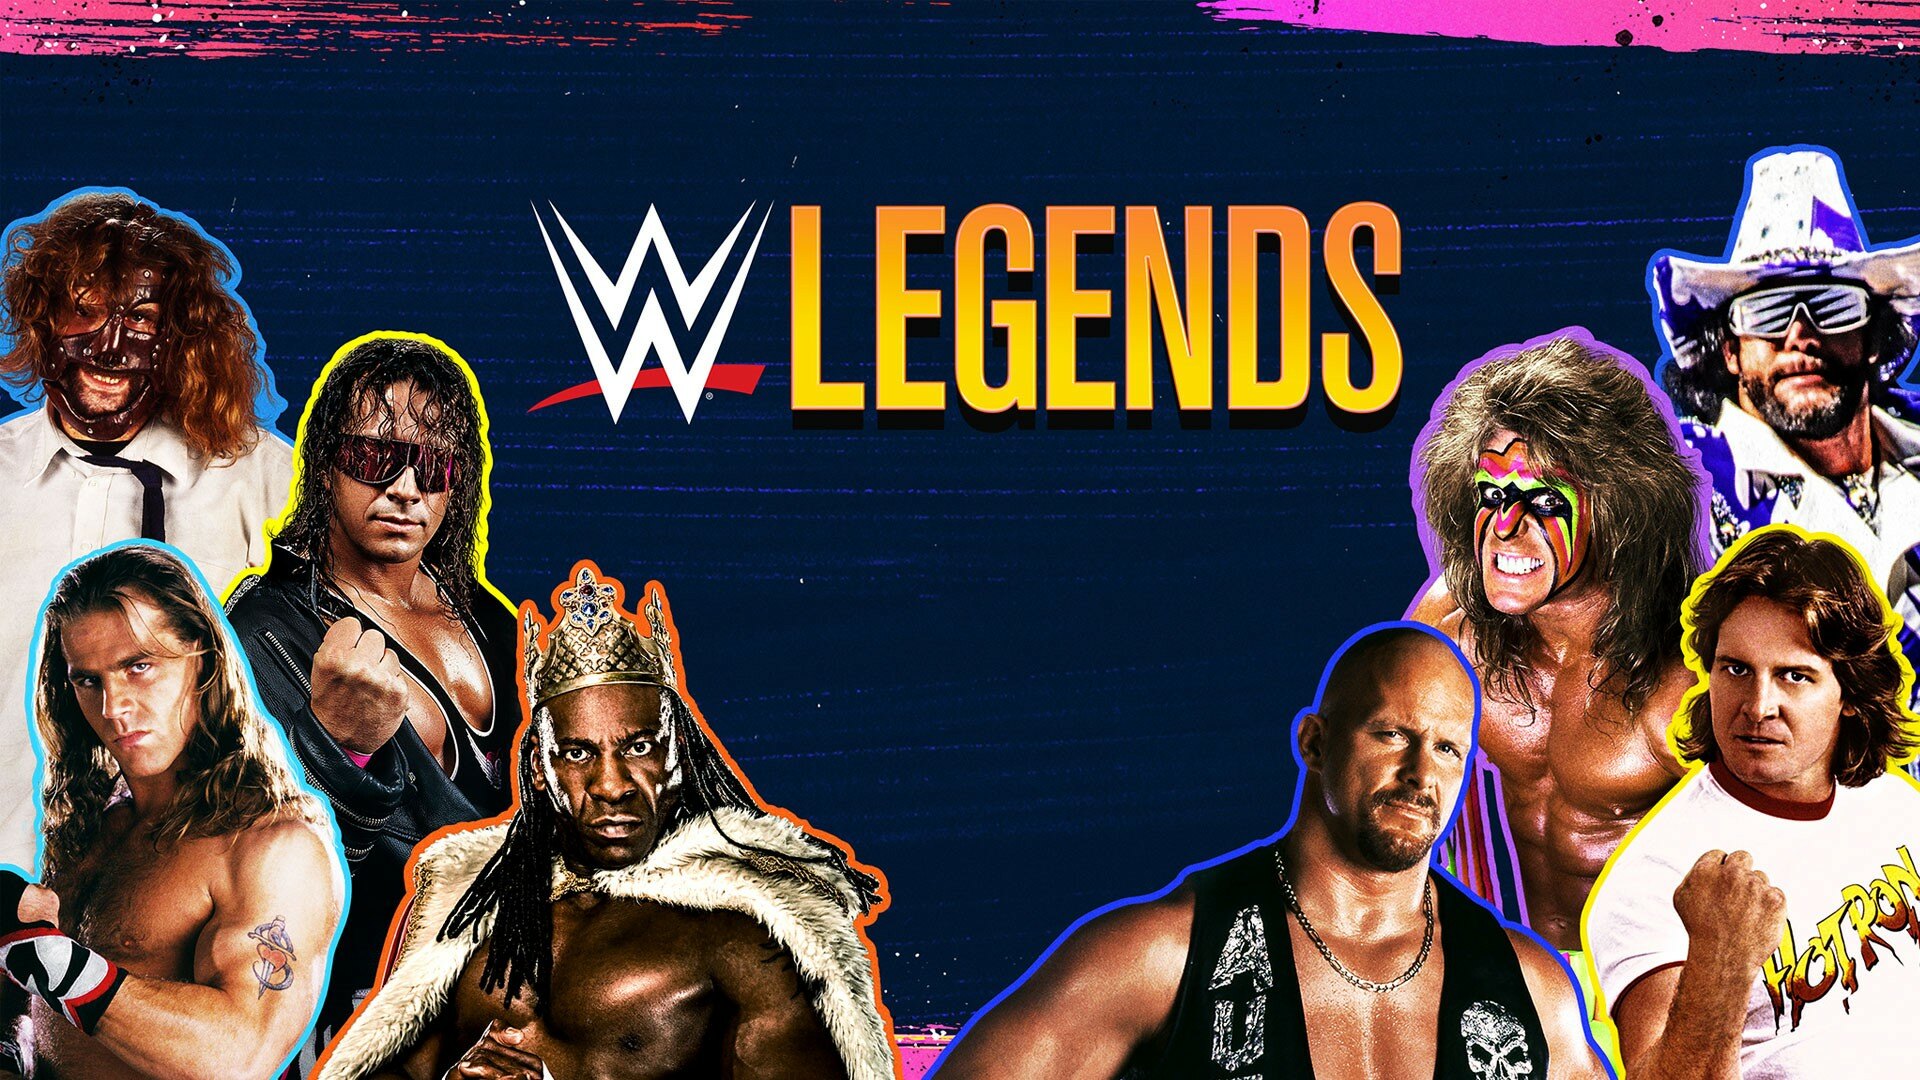 biography wwe legends season 3 how many episodes